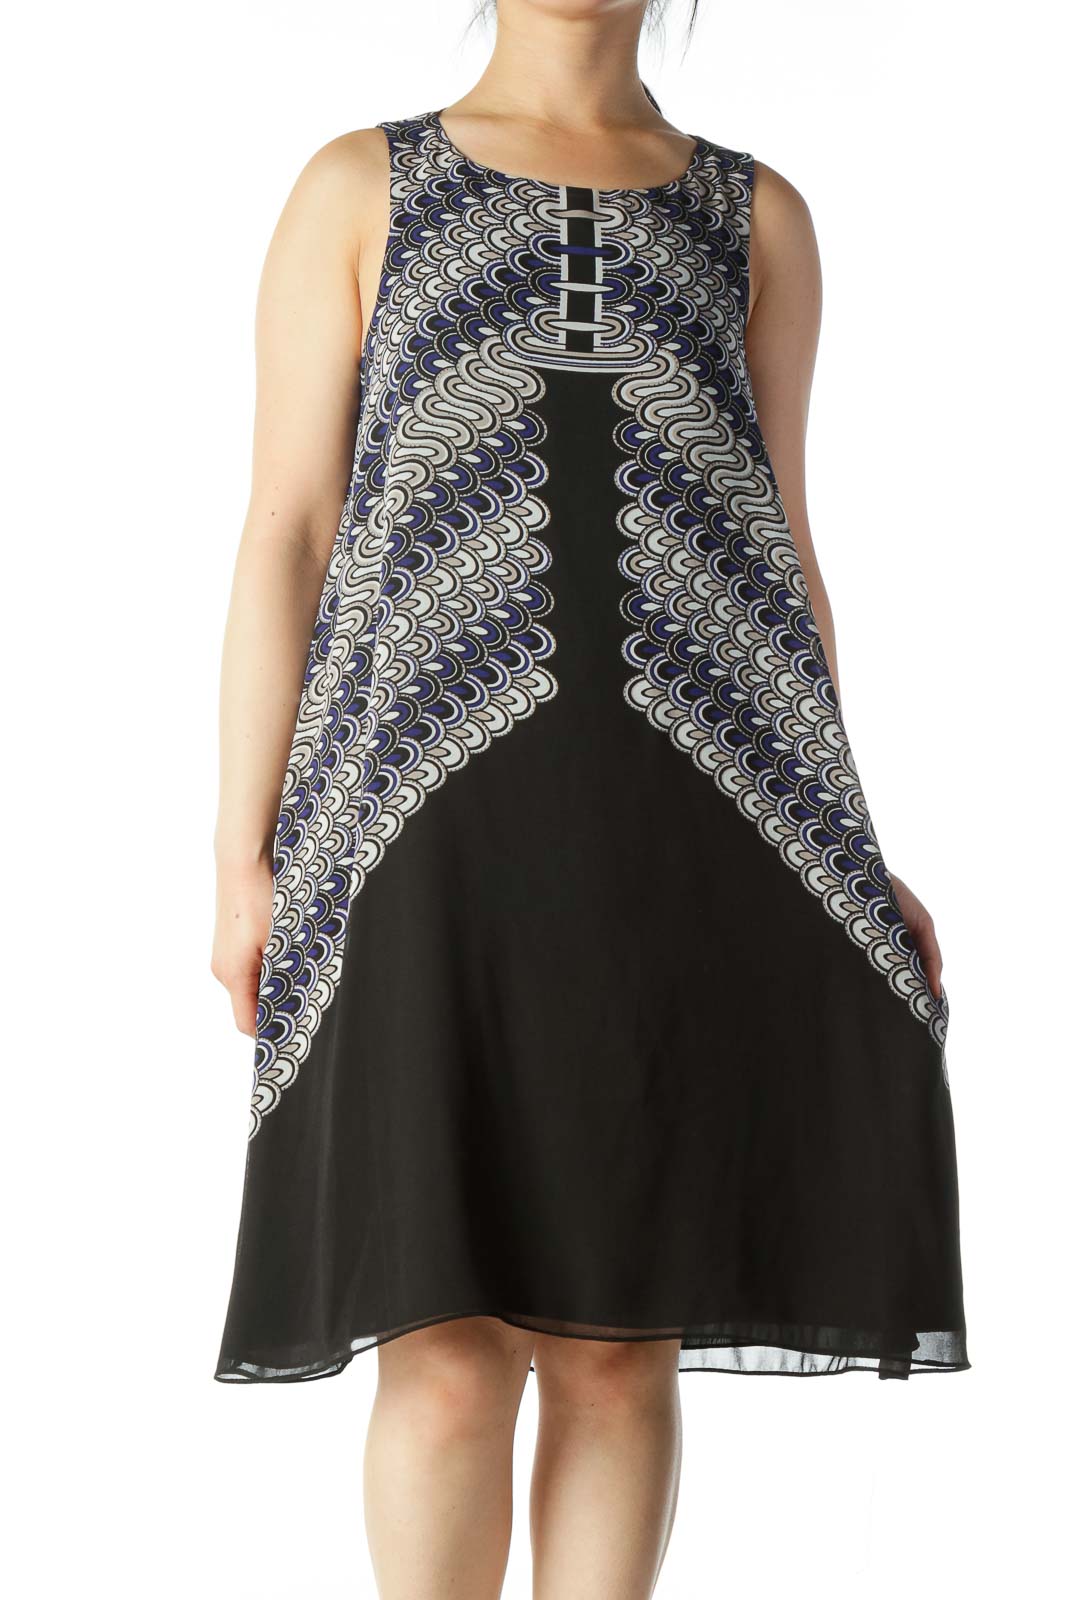 Black and Blue Patterned Sheath Dress  Front